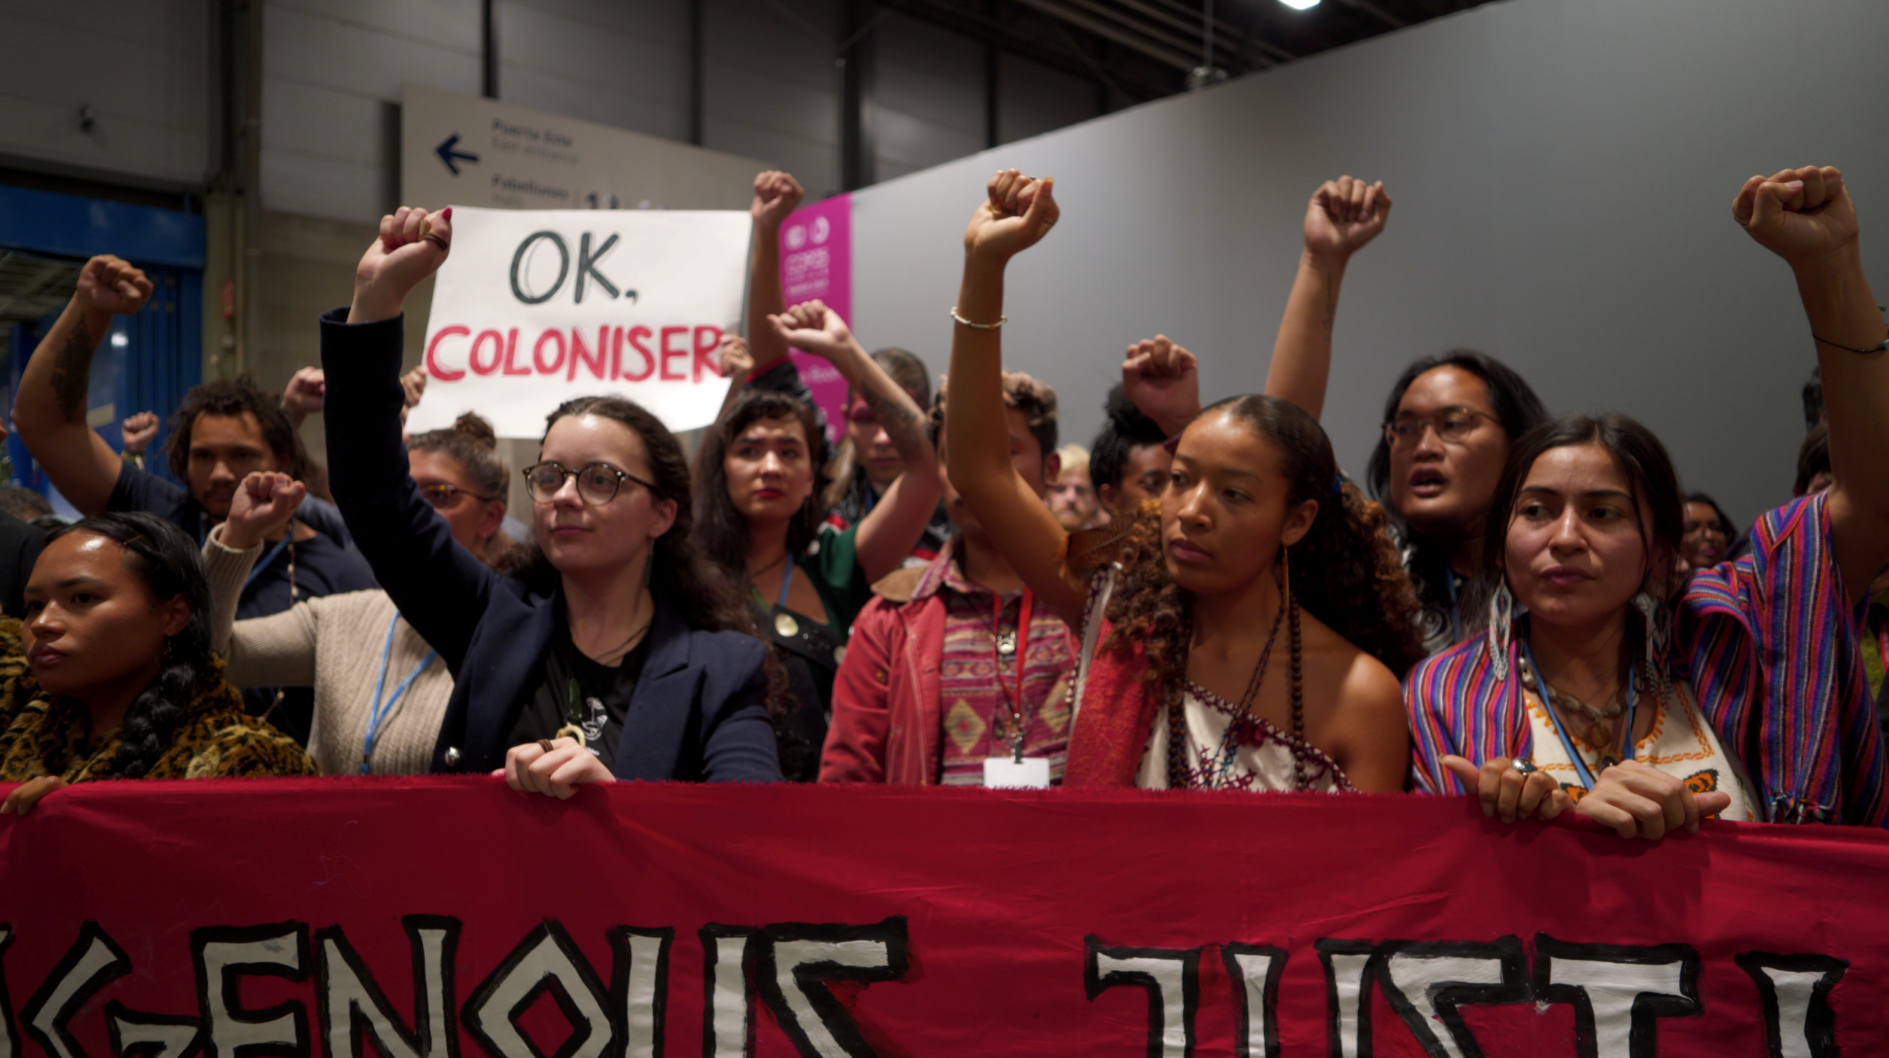 Civil society and indigenous groups occupy CoP25's main hall to call for action